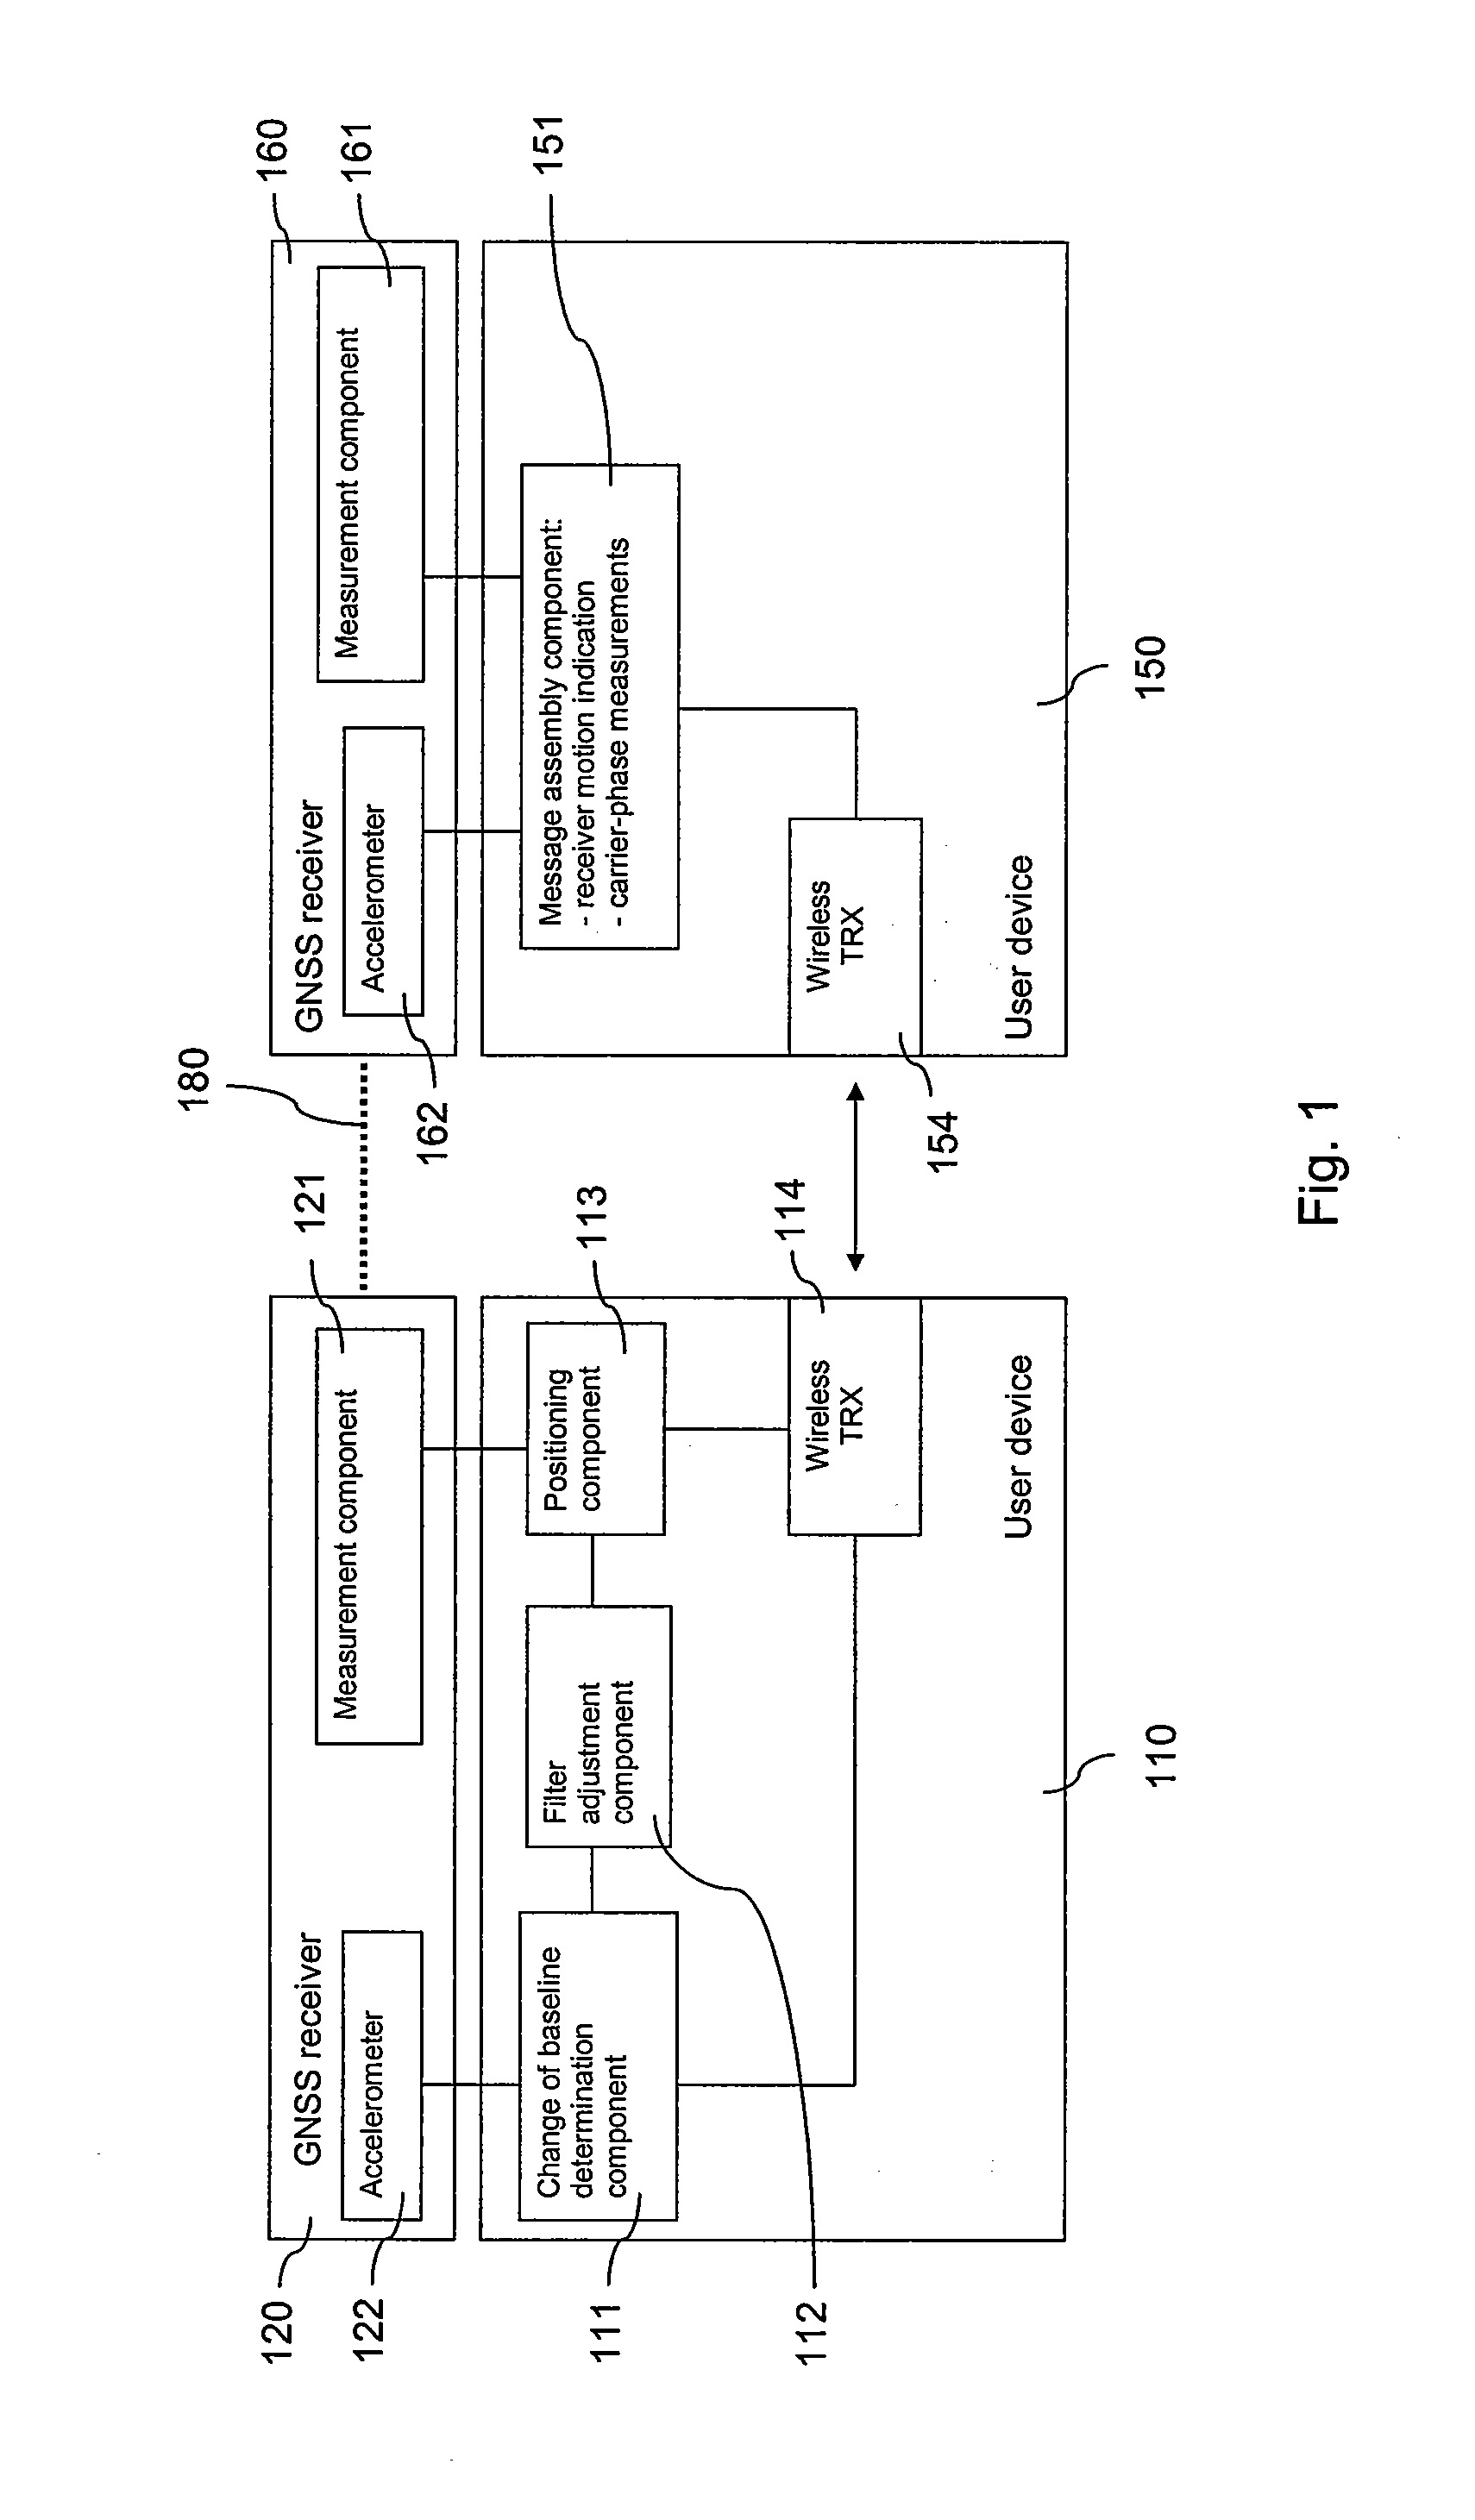 Determination of a Relative Position of a Satellite Signal Receiver